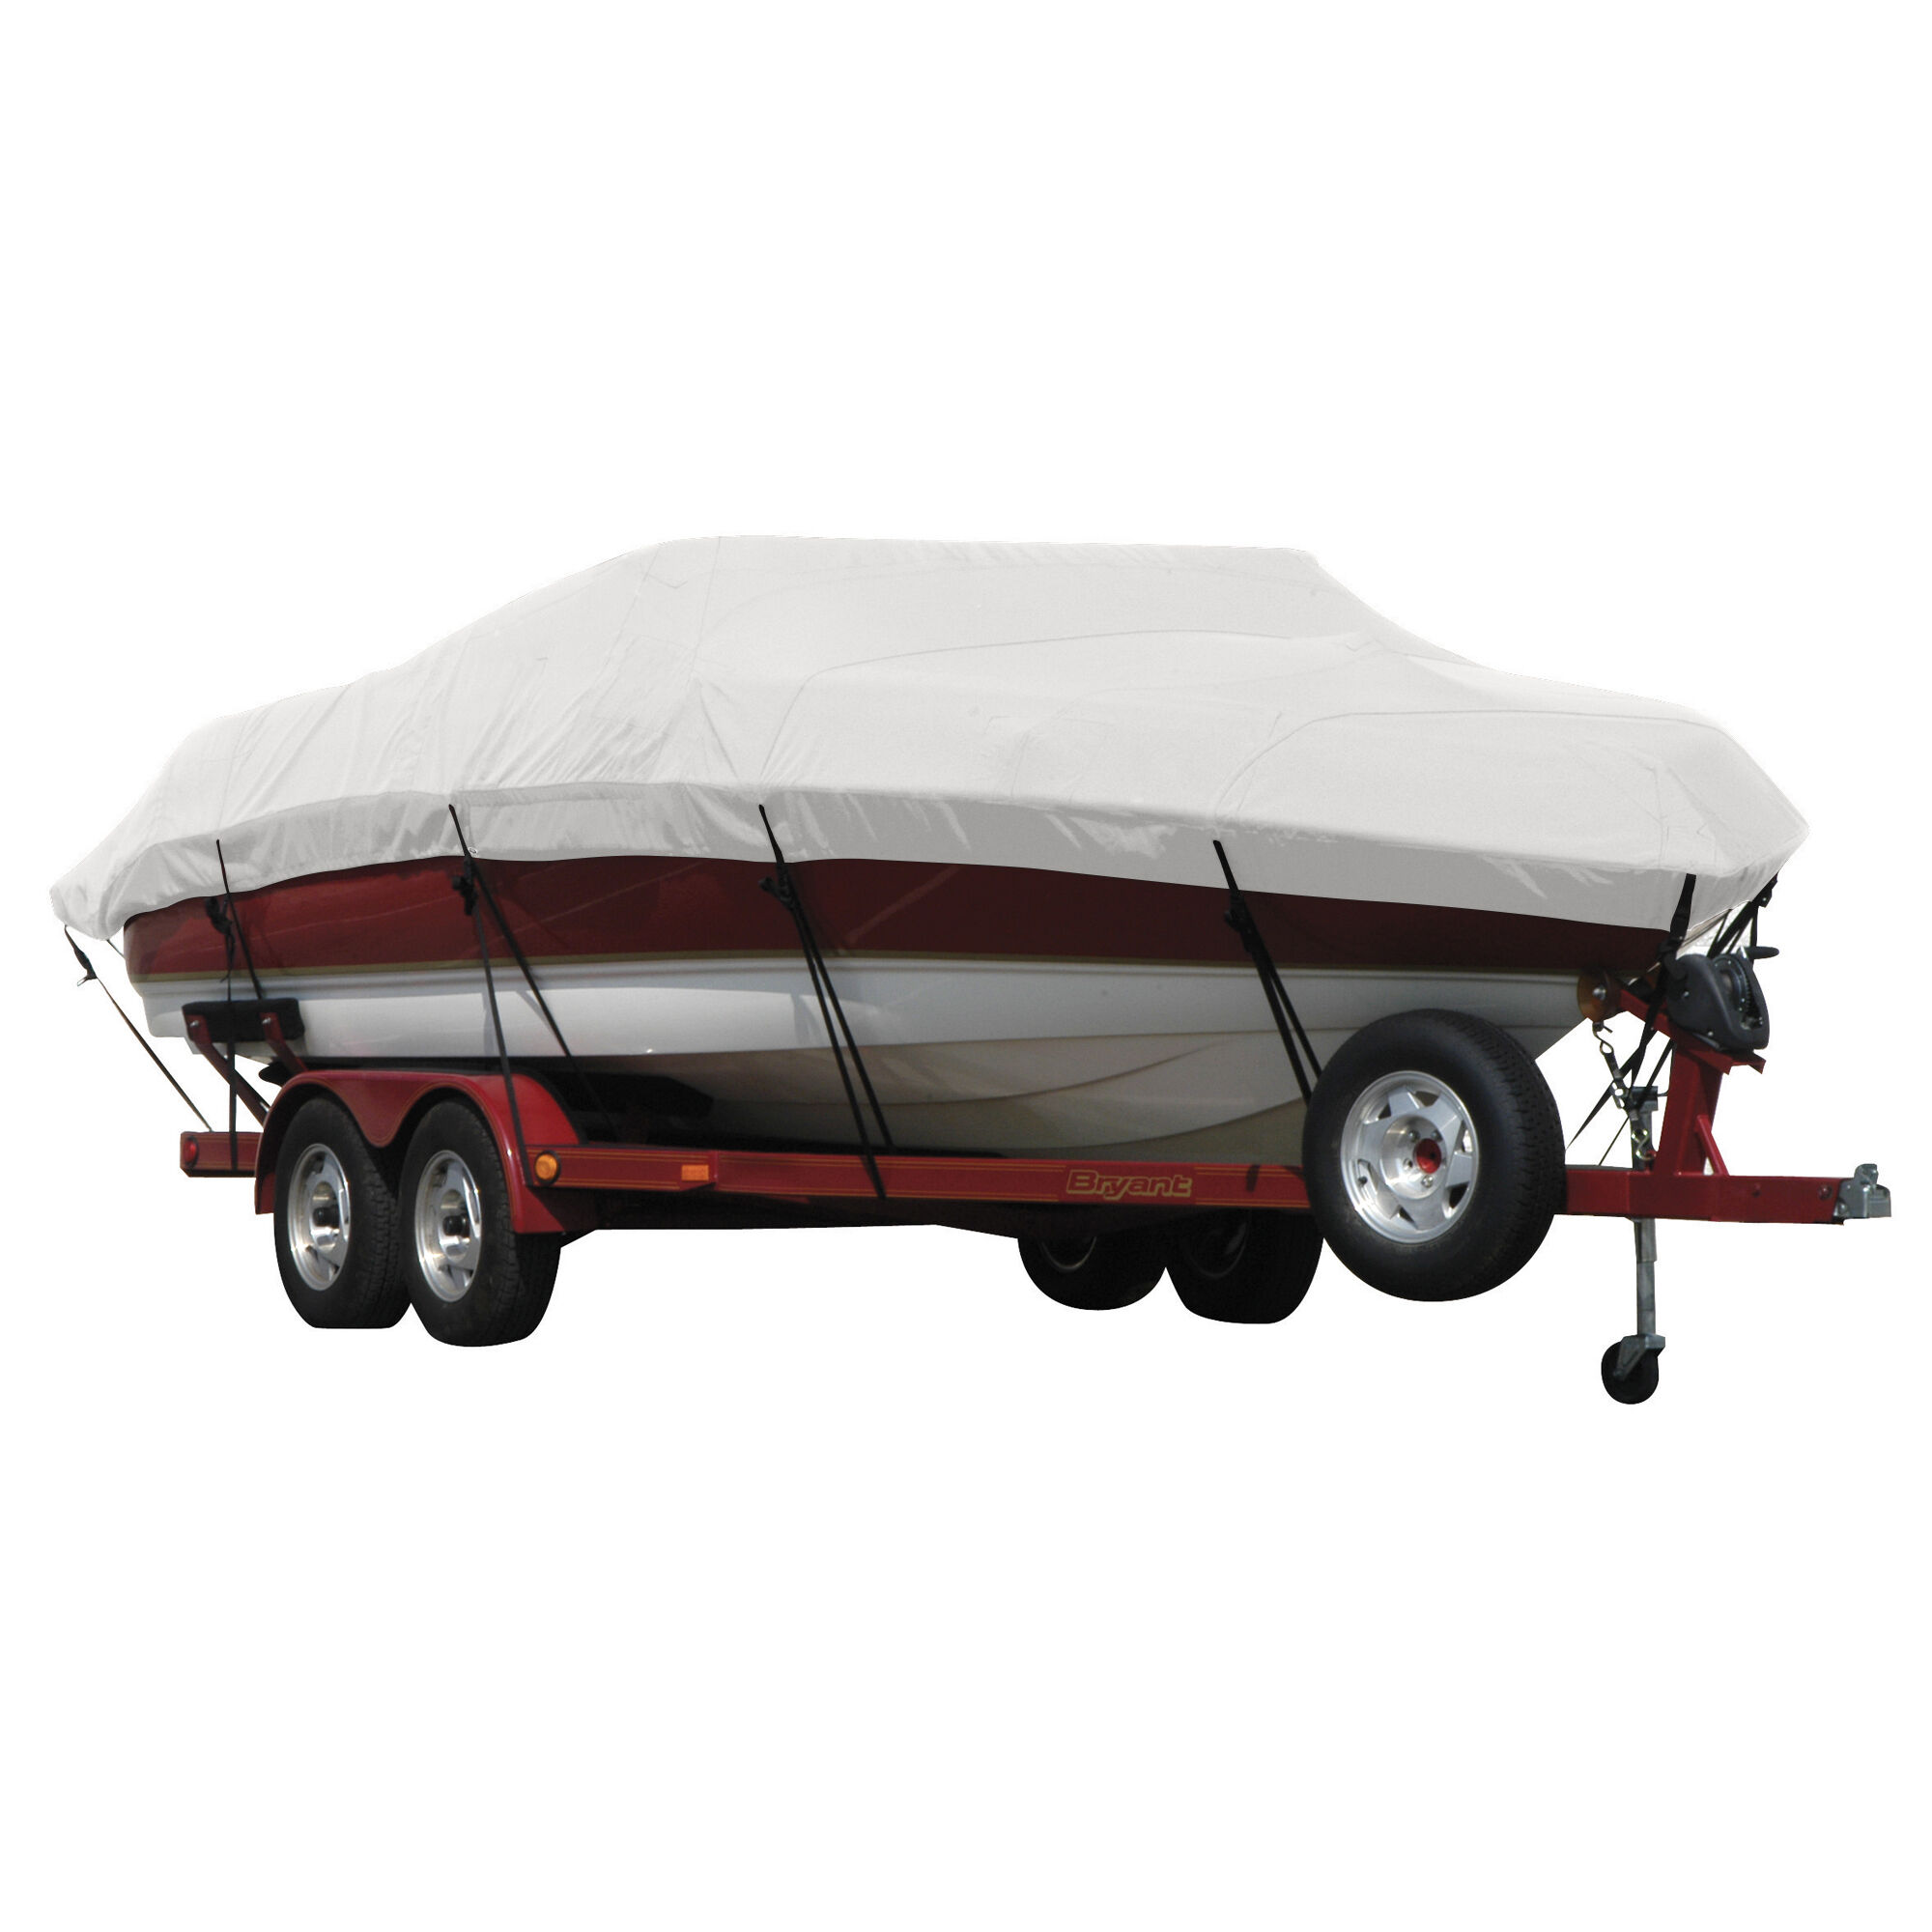 Covermate Exact Fit Sunbrella Boat Cover for Wellcraft Eclipse 215 Eclipse 215 Does Not Accommodate Bow Rails I/O. Natural in Natural Tan